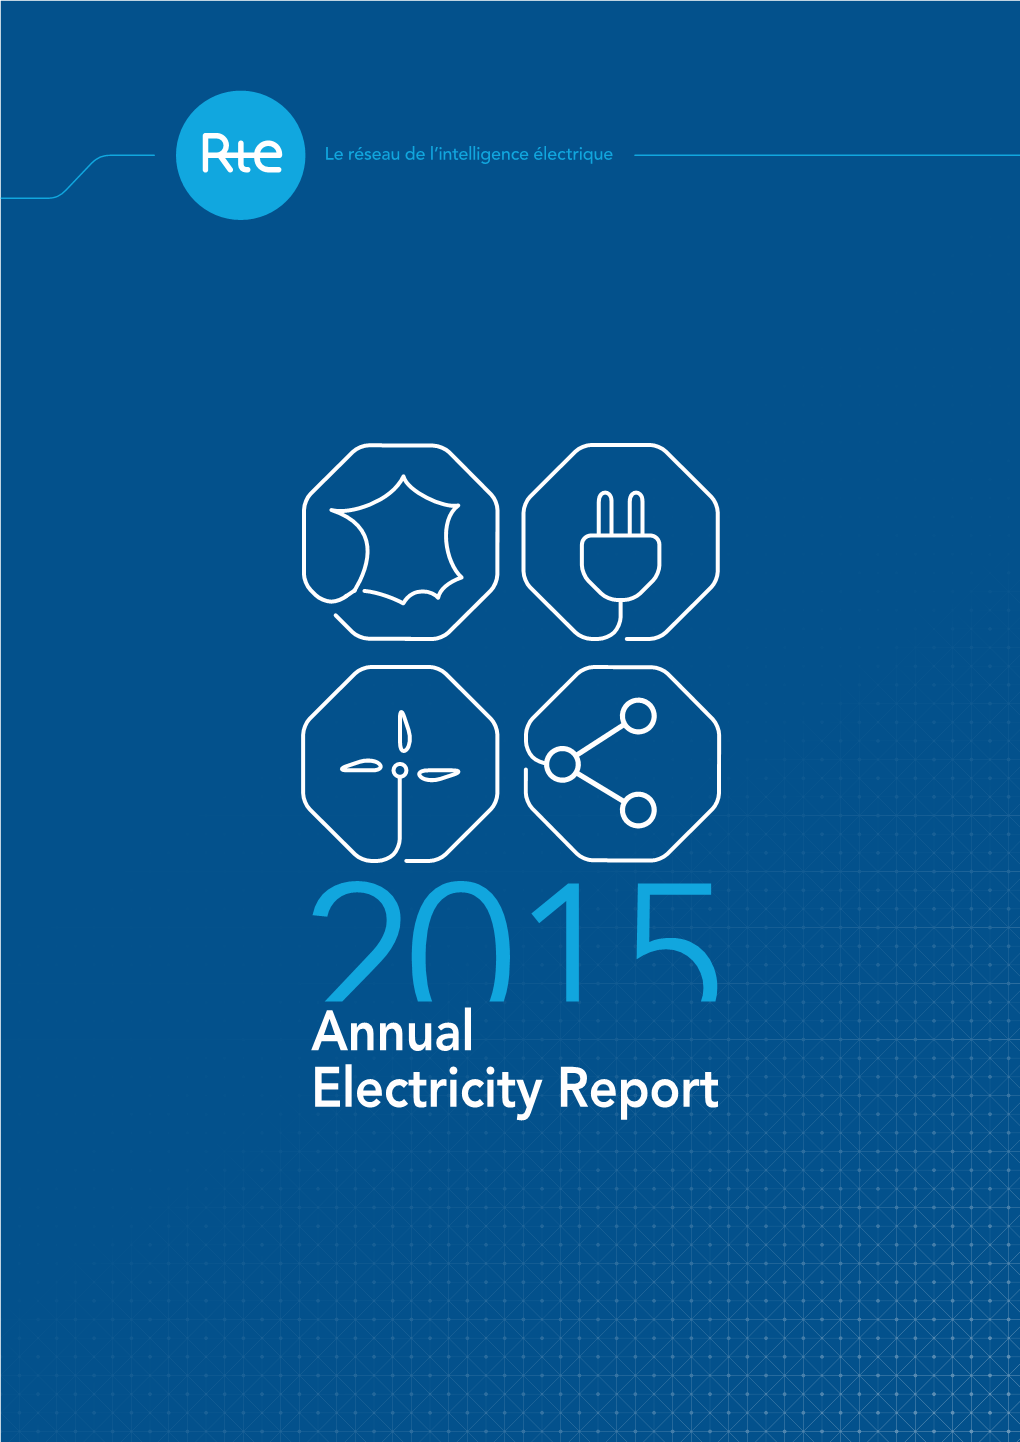 Annual Electricity Report